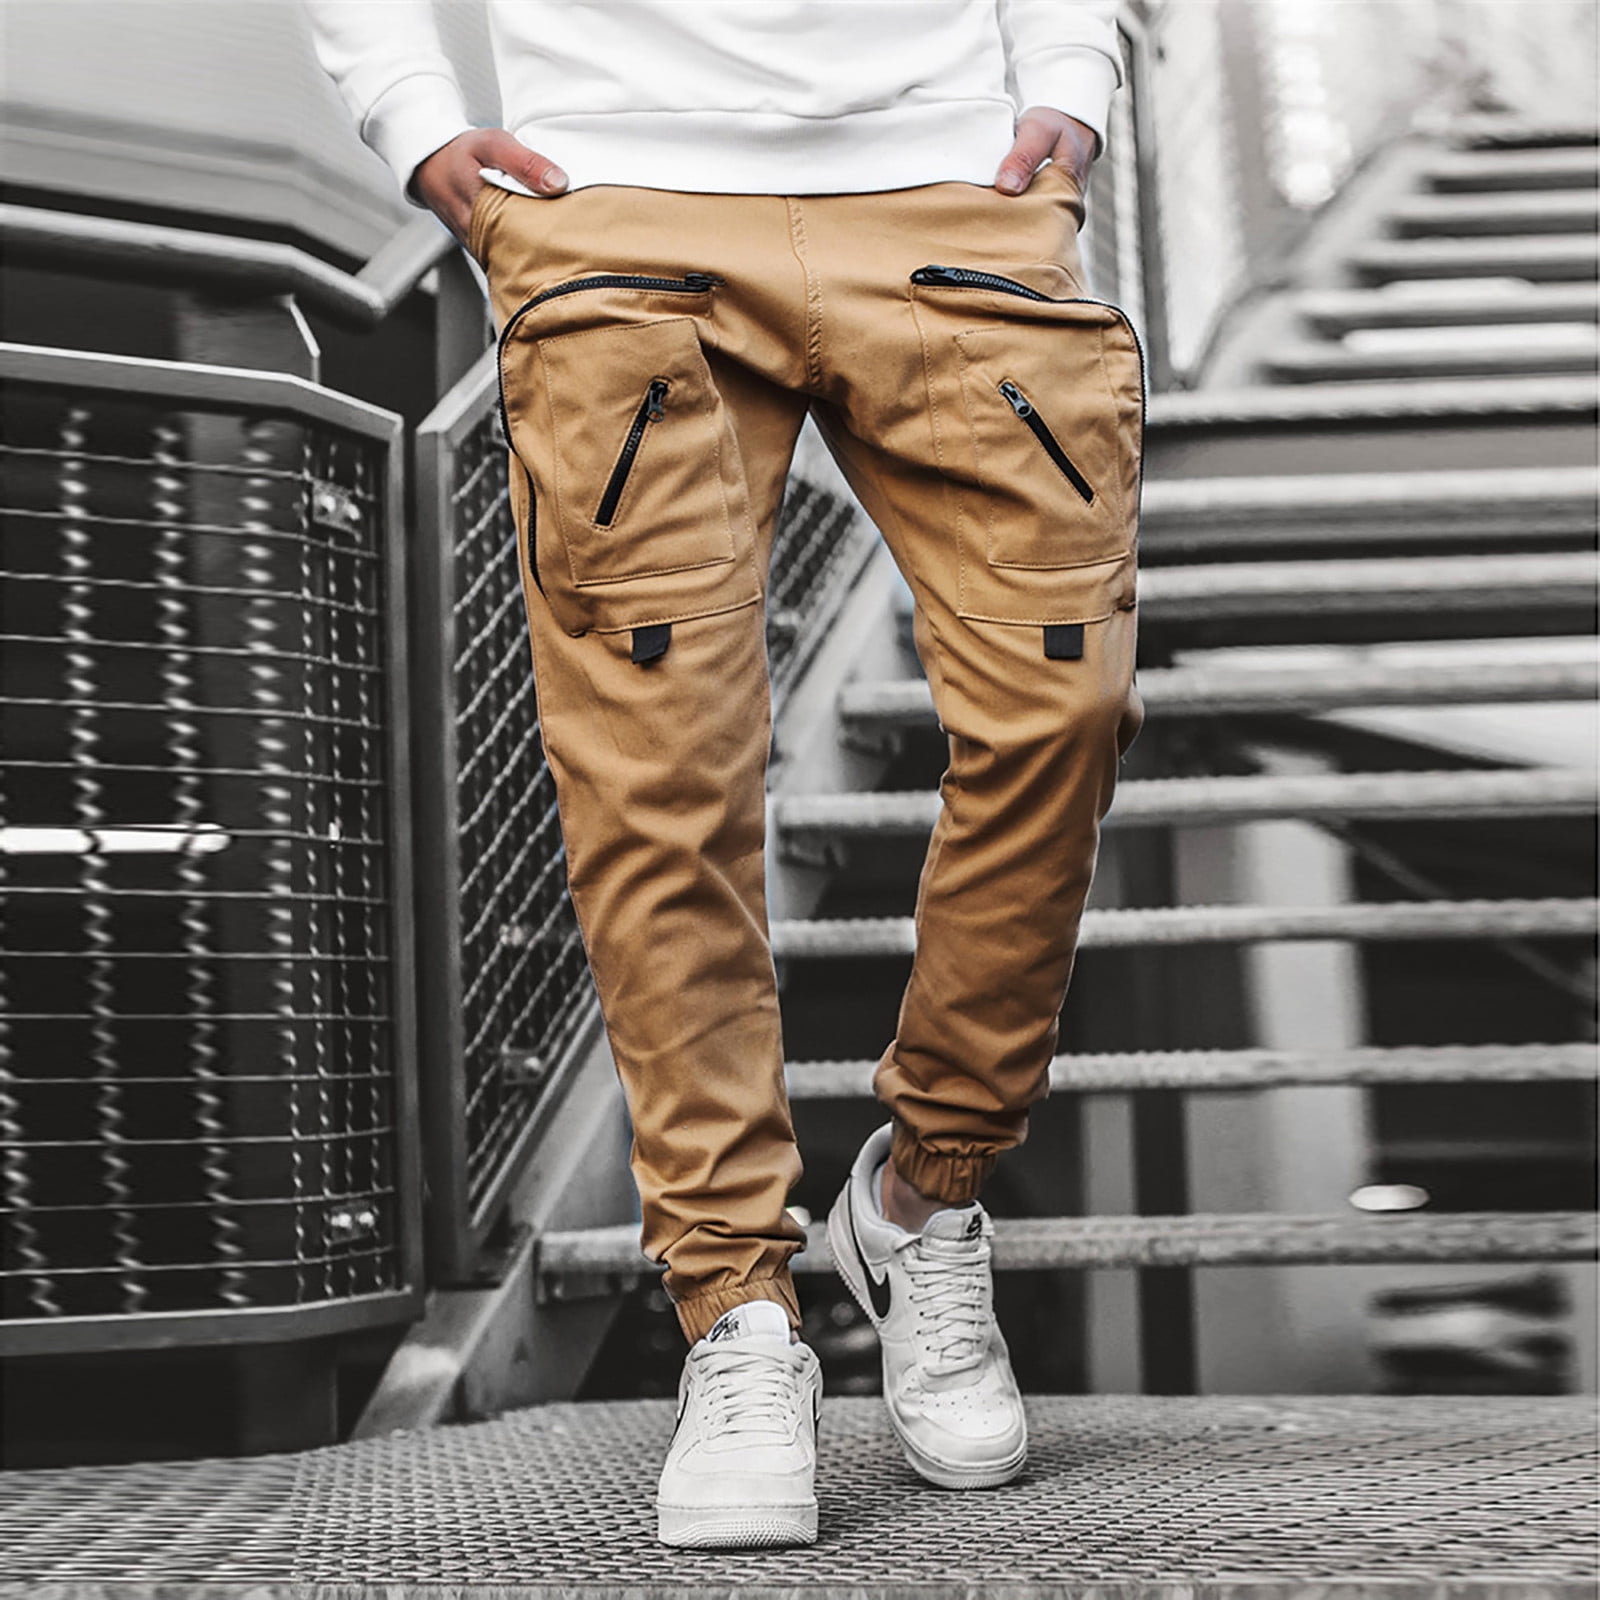 jsaierl Men's Solid Color Pencil Pants Casual Stretch Slim Fit Sweatpants  Fashion Jogger Trousers with Multi Pockets